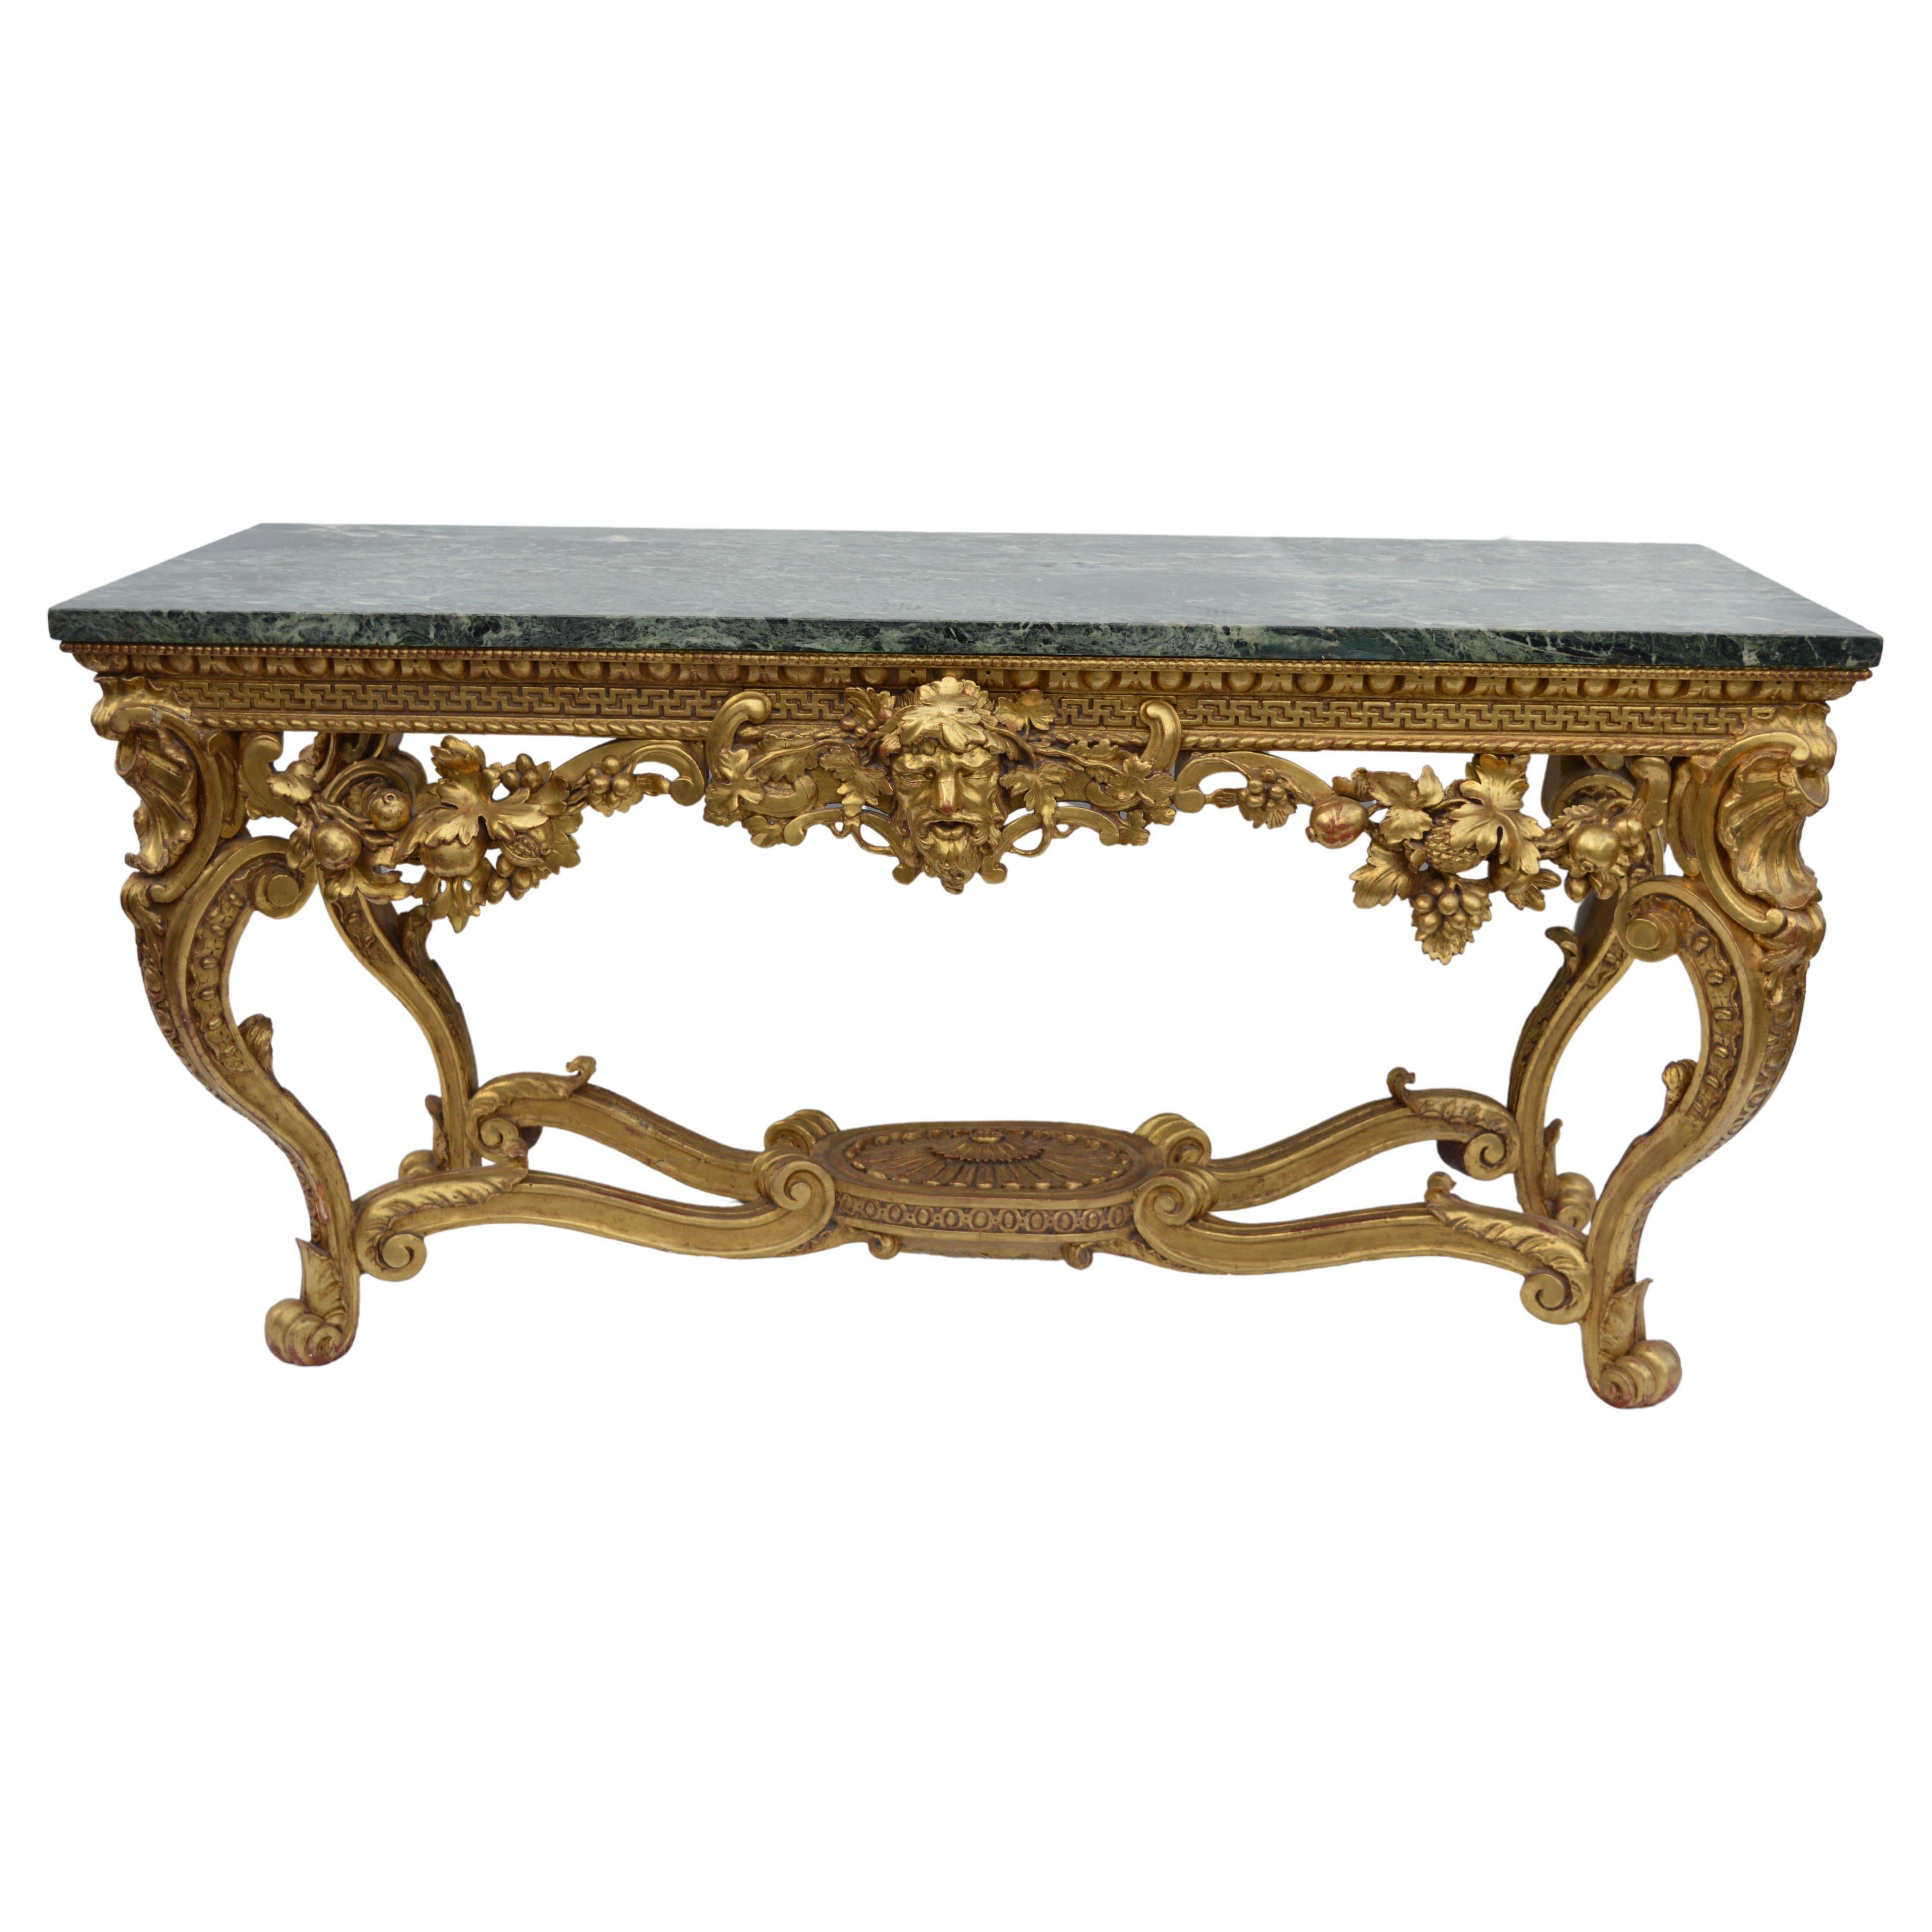 Large English, early 19th century, neoclassical, Giltwood console table. Hand-carved with marble top.